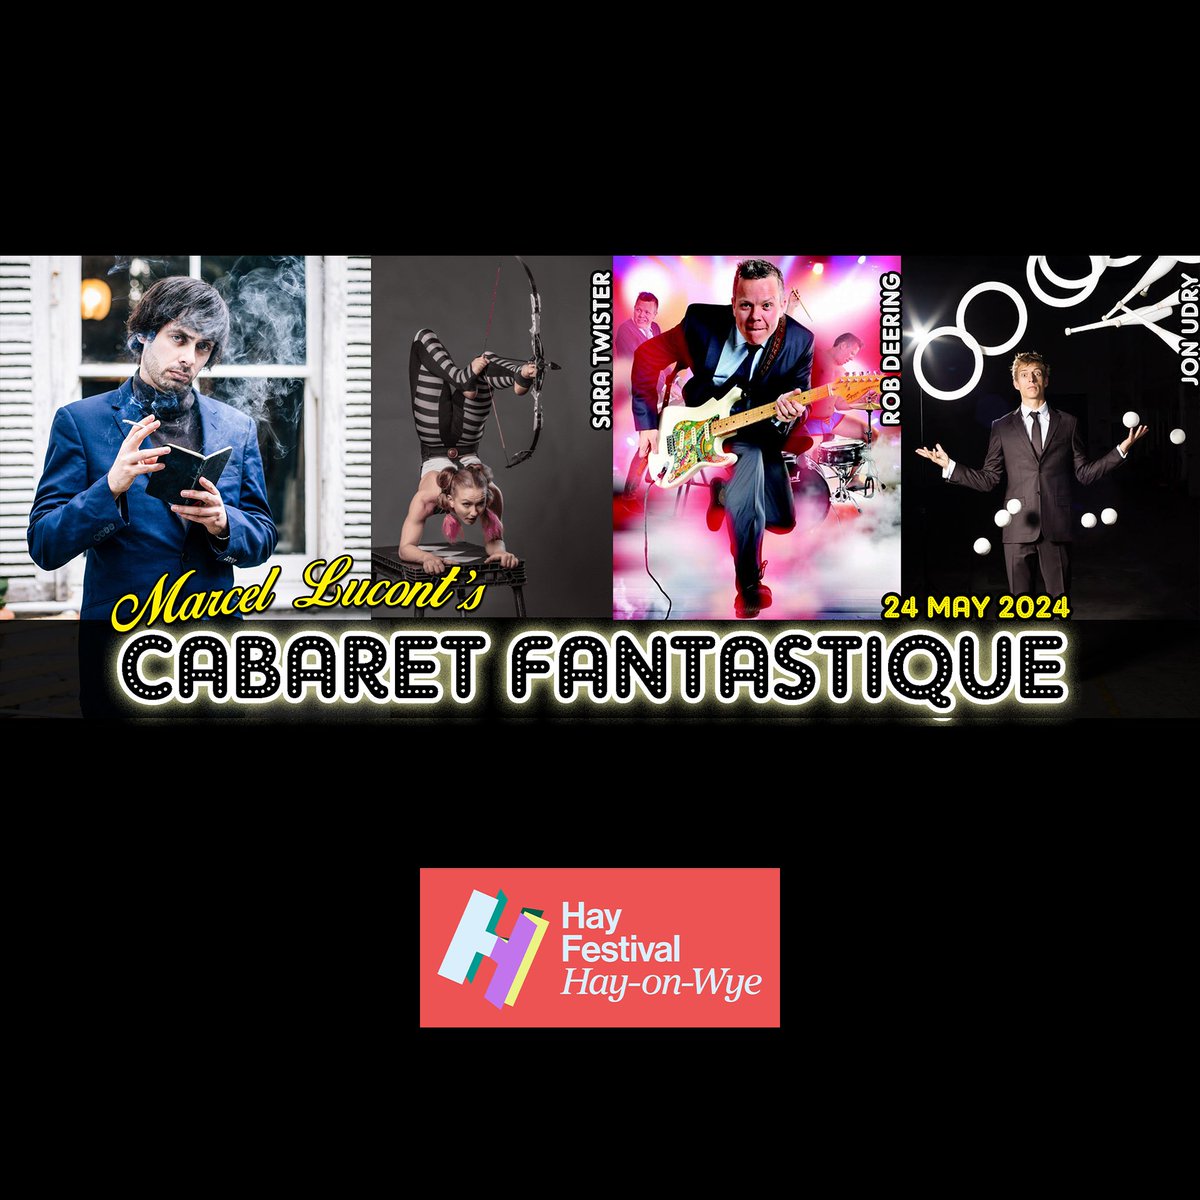 Cabaret Fantastique makes its @hayfestival début on May 24. With very special guests: @jonudry @RobDeering Sara Twister ⭐ 'One of the finest nights in our fair city' @TimeOutLondon ⭐ Be there. hayfestival.com/p-21659-marcel…